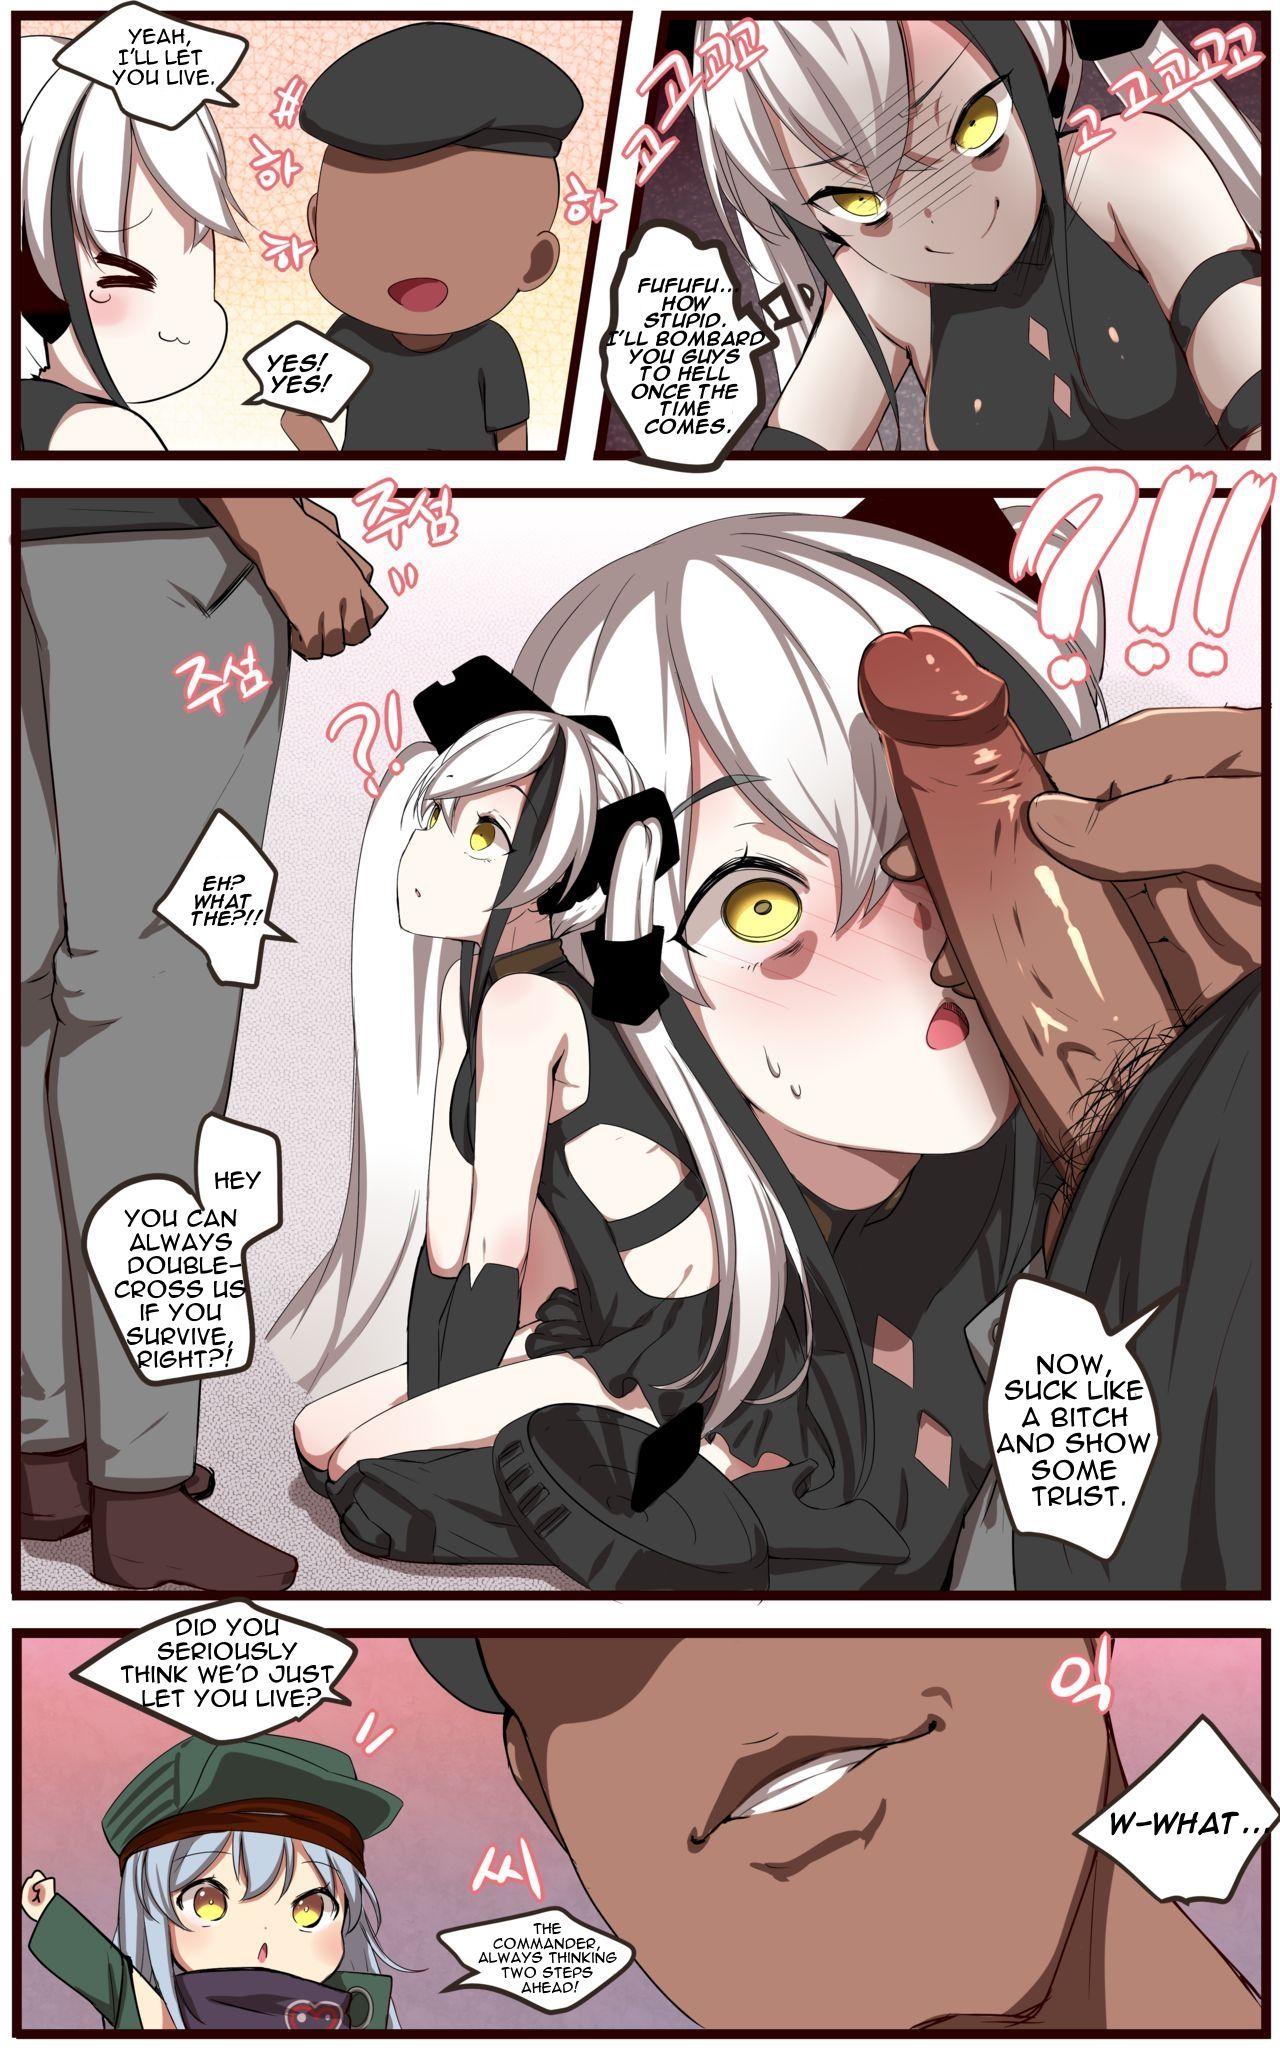 Big Black Cock How to use dolls 06 - Girls frontline Mms - Page 4